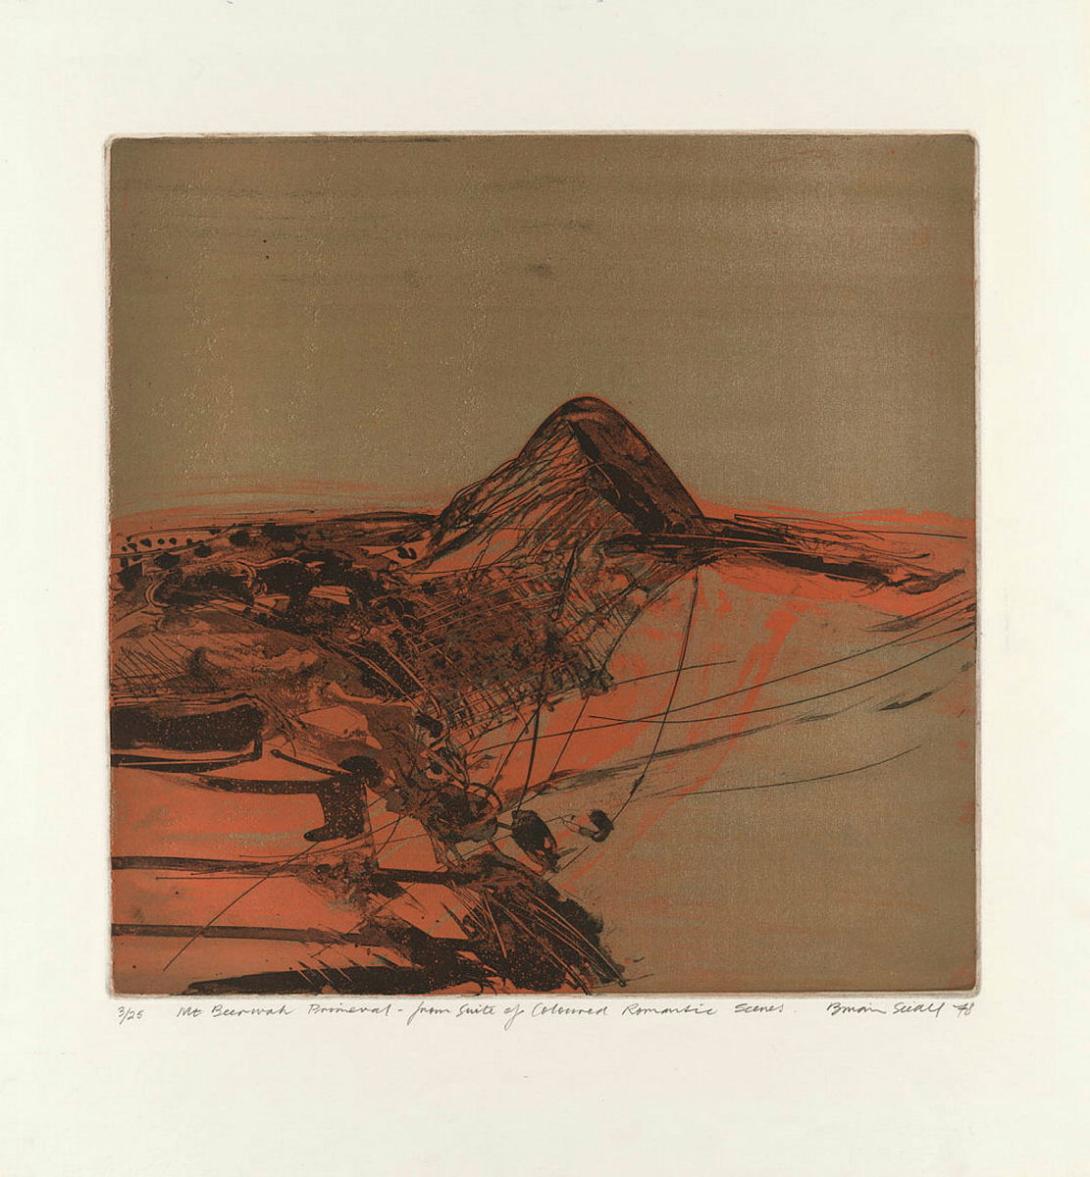 Artwork Mt Beerwah primeval (from 'Suite of Coloured Romantic Scenes') this artwork made of Etching, sugar-lift aquatint, printed intaglio and relief on paper, created in 1978-01-01